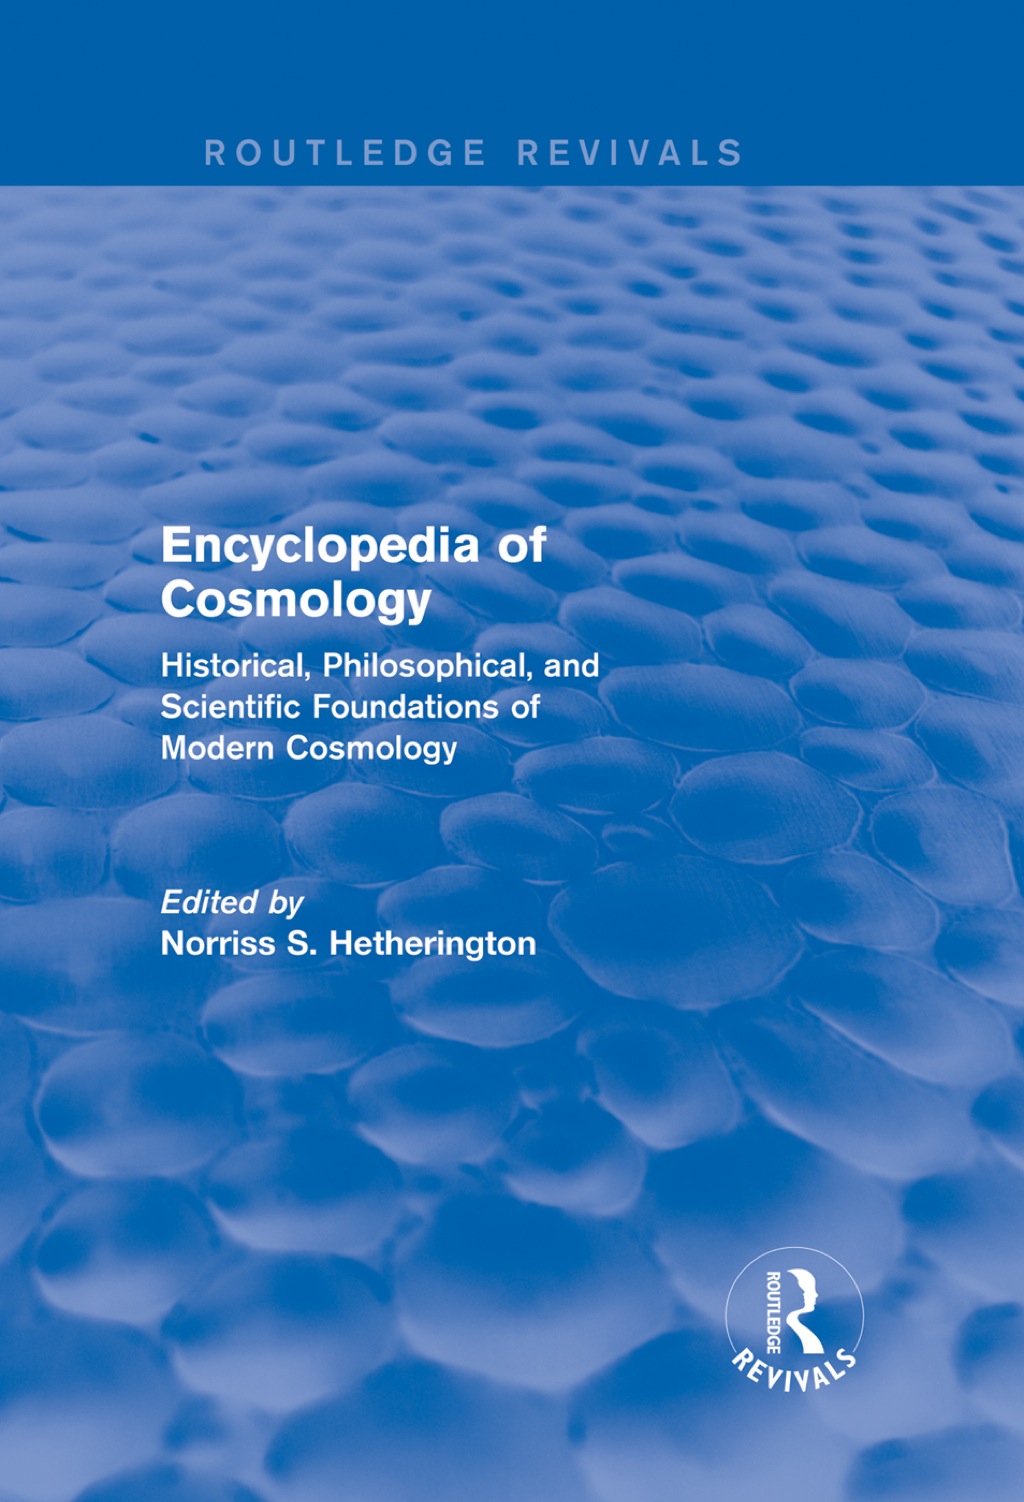 Encyclopedia of Cosmology (Routledge Revivals) - 1st Edition (eBook Rental)